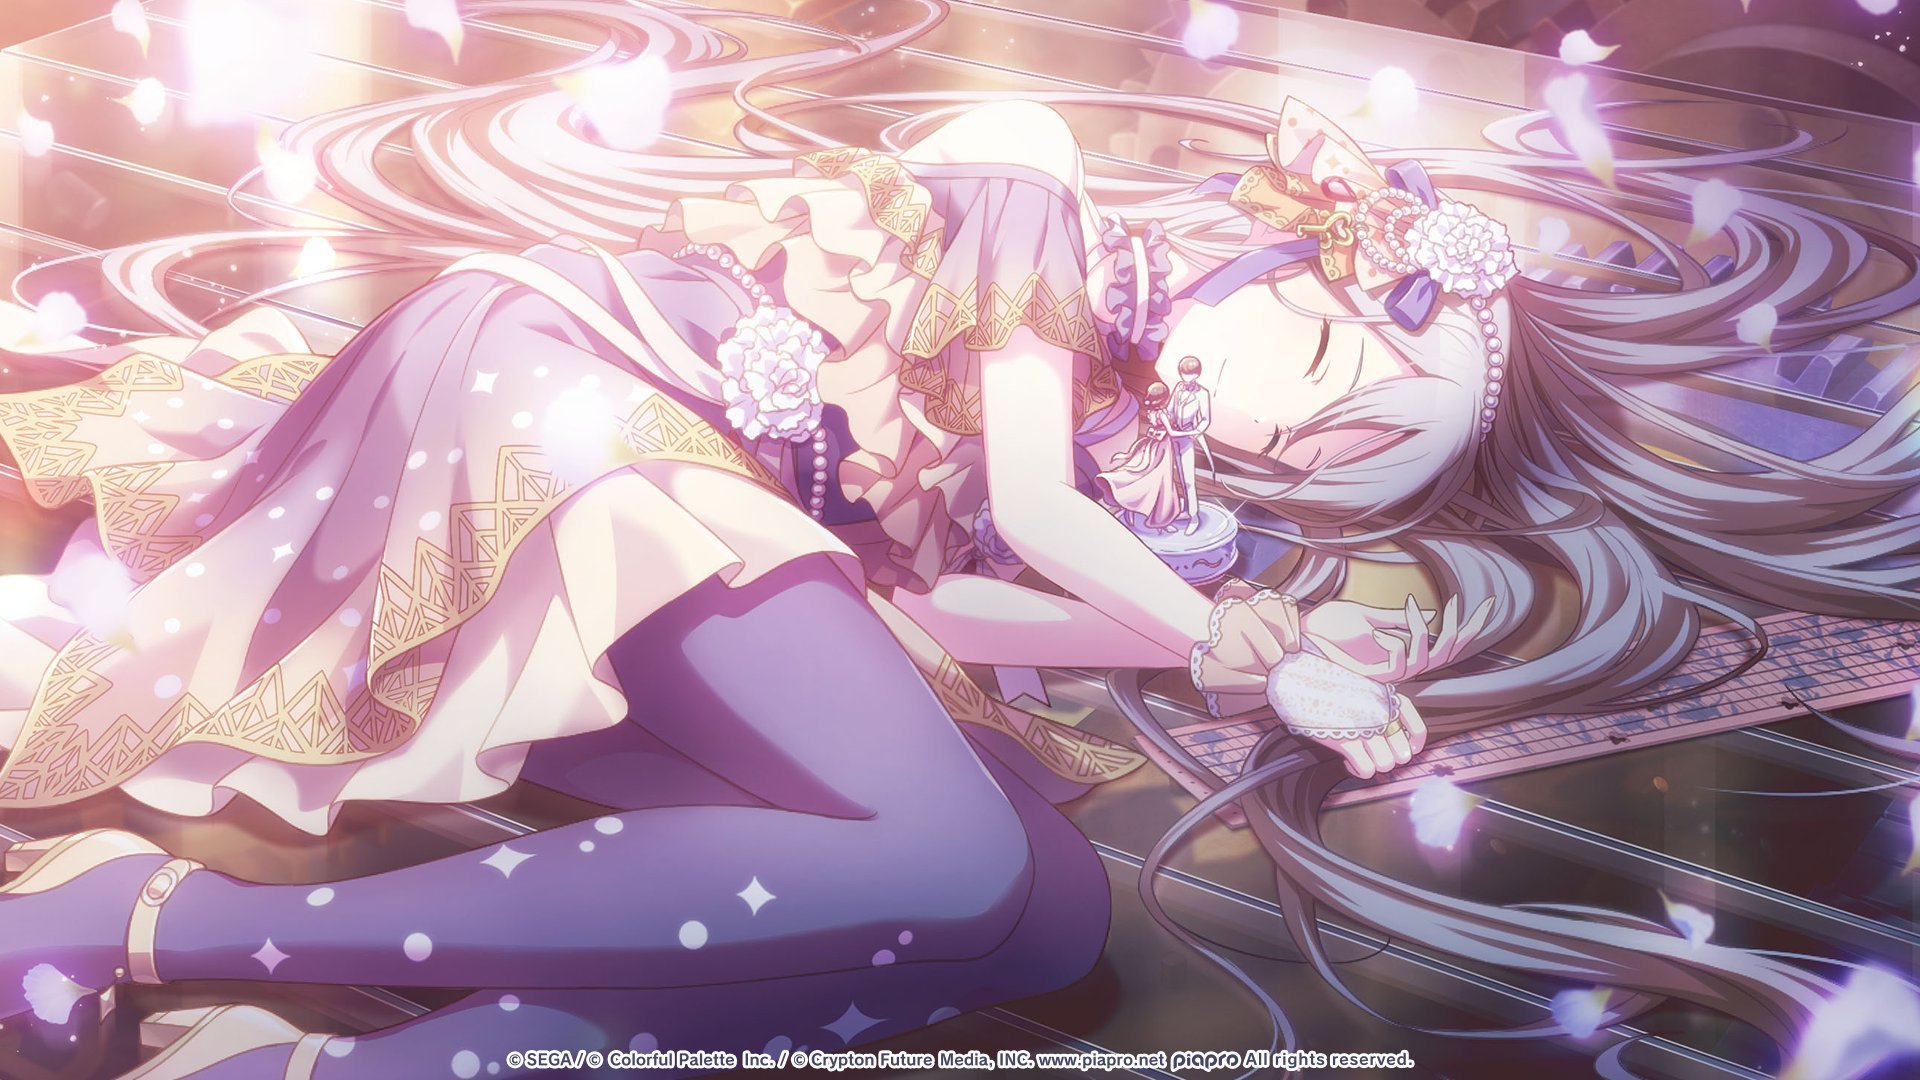 HATSUNE MIKU: COLORFUL STAGE! out these memorable illustrations featuring Nightcord at 25:00!